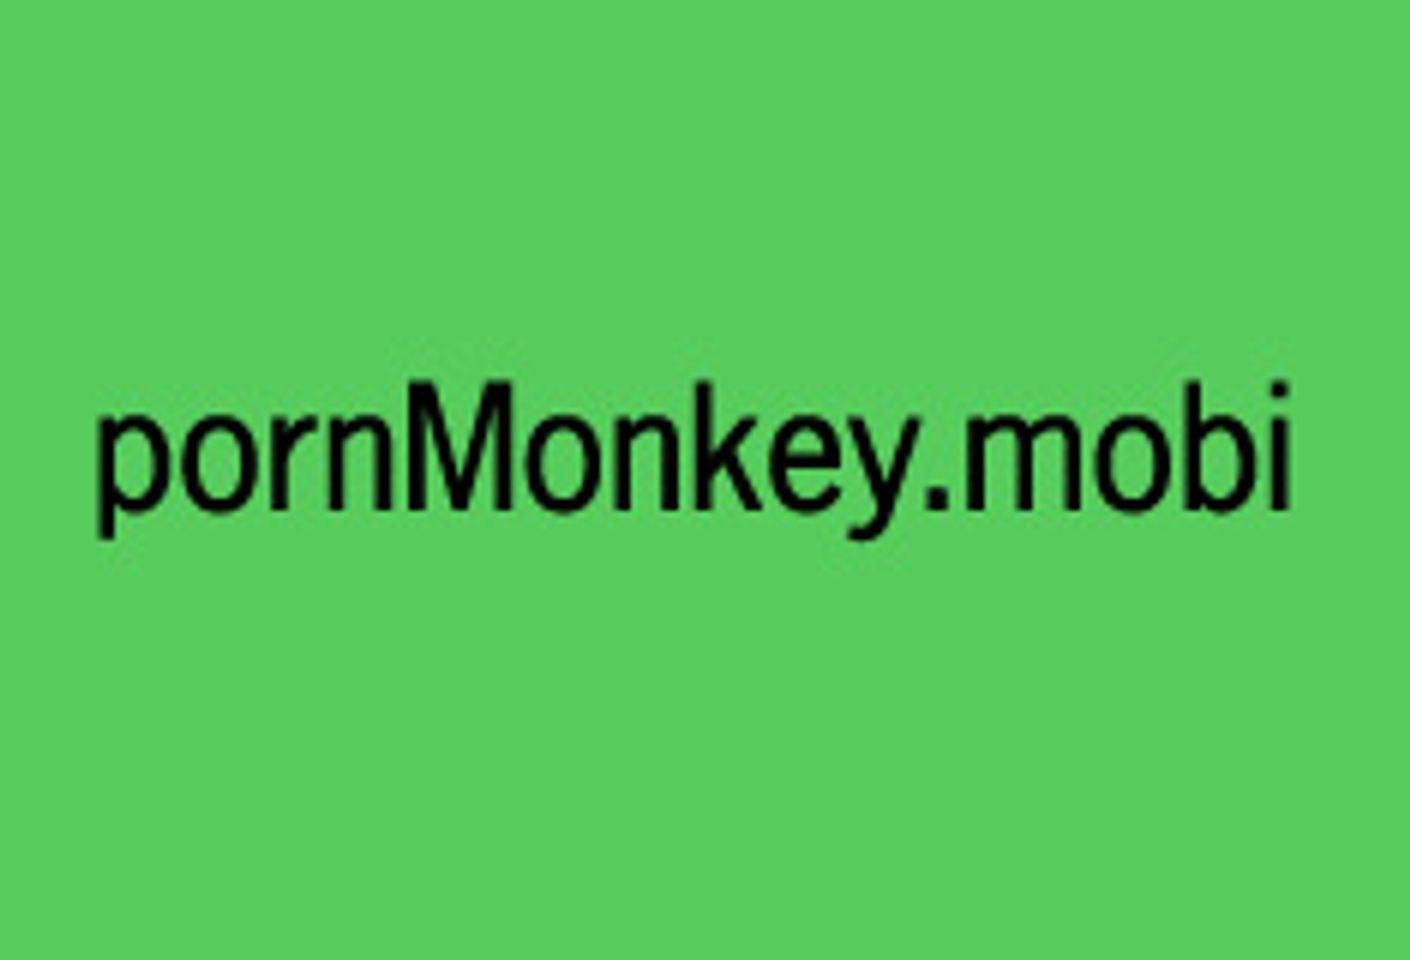 PornMonkey.mobi to Host Mobile RSS Feeds and Blogs for Free